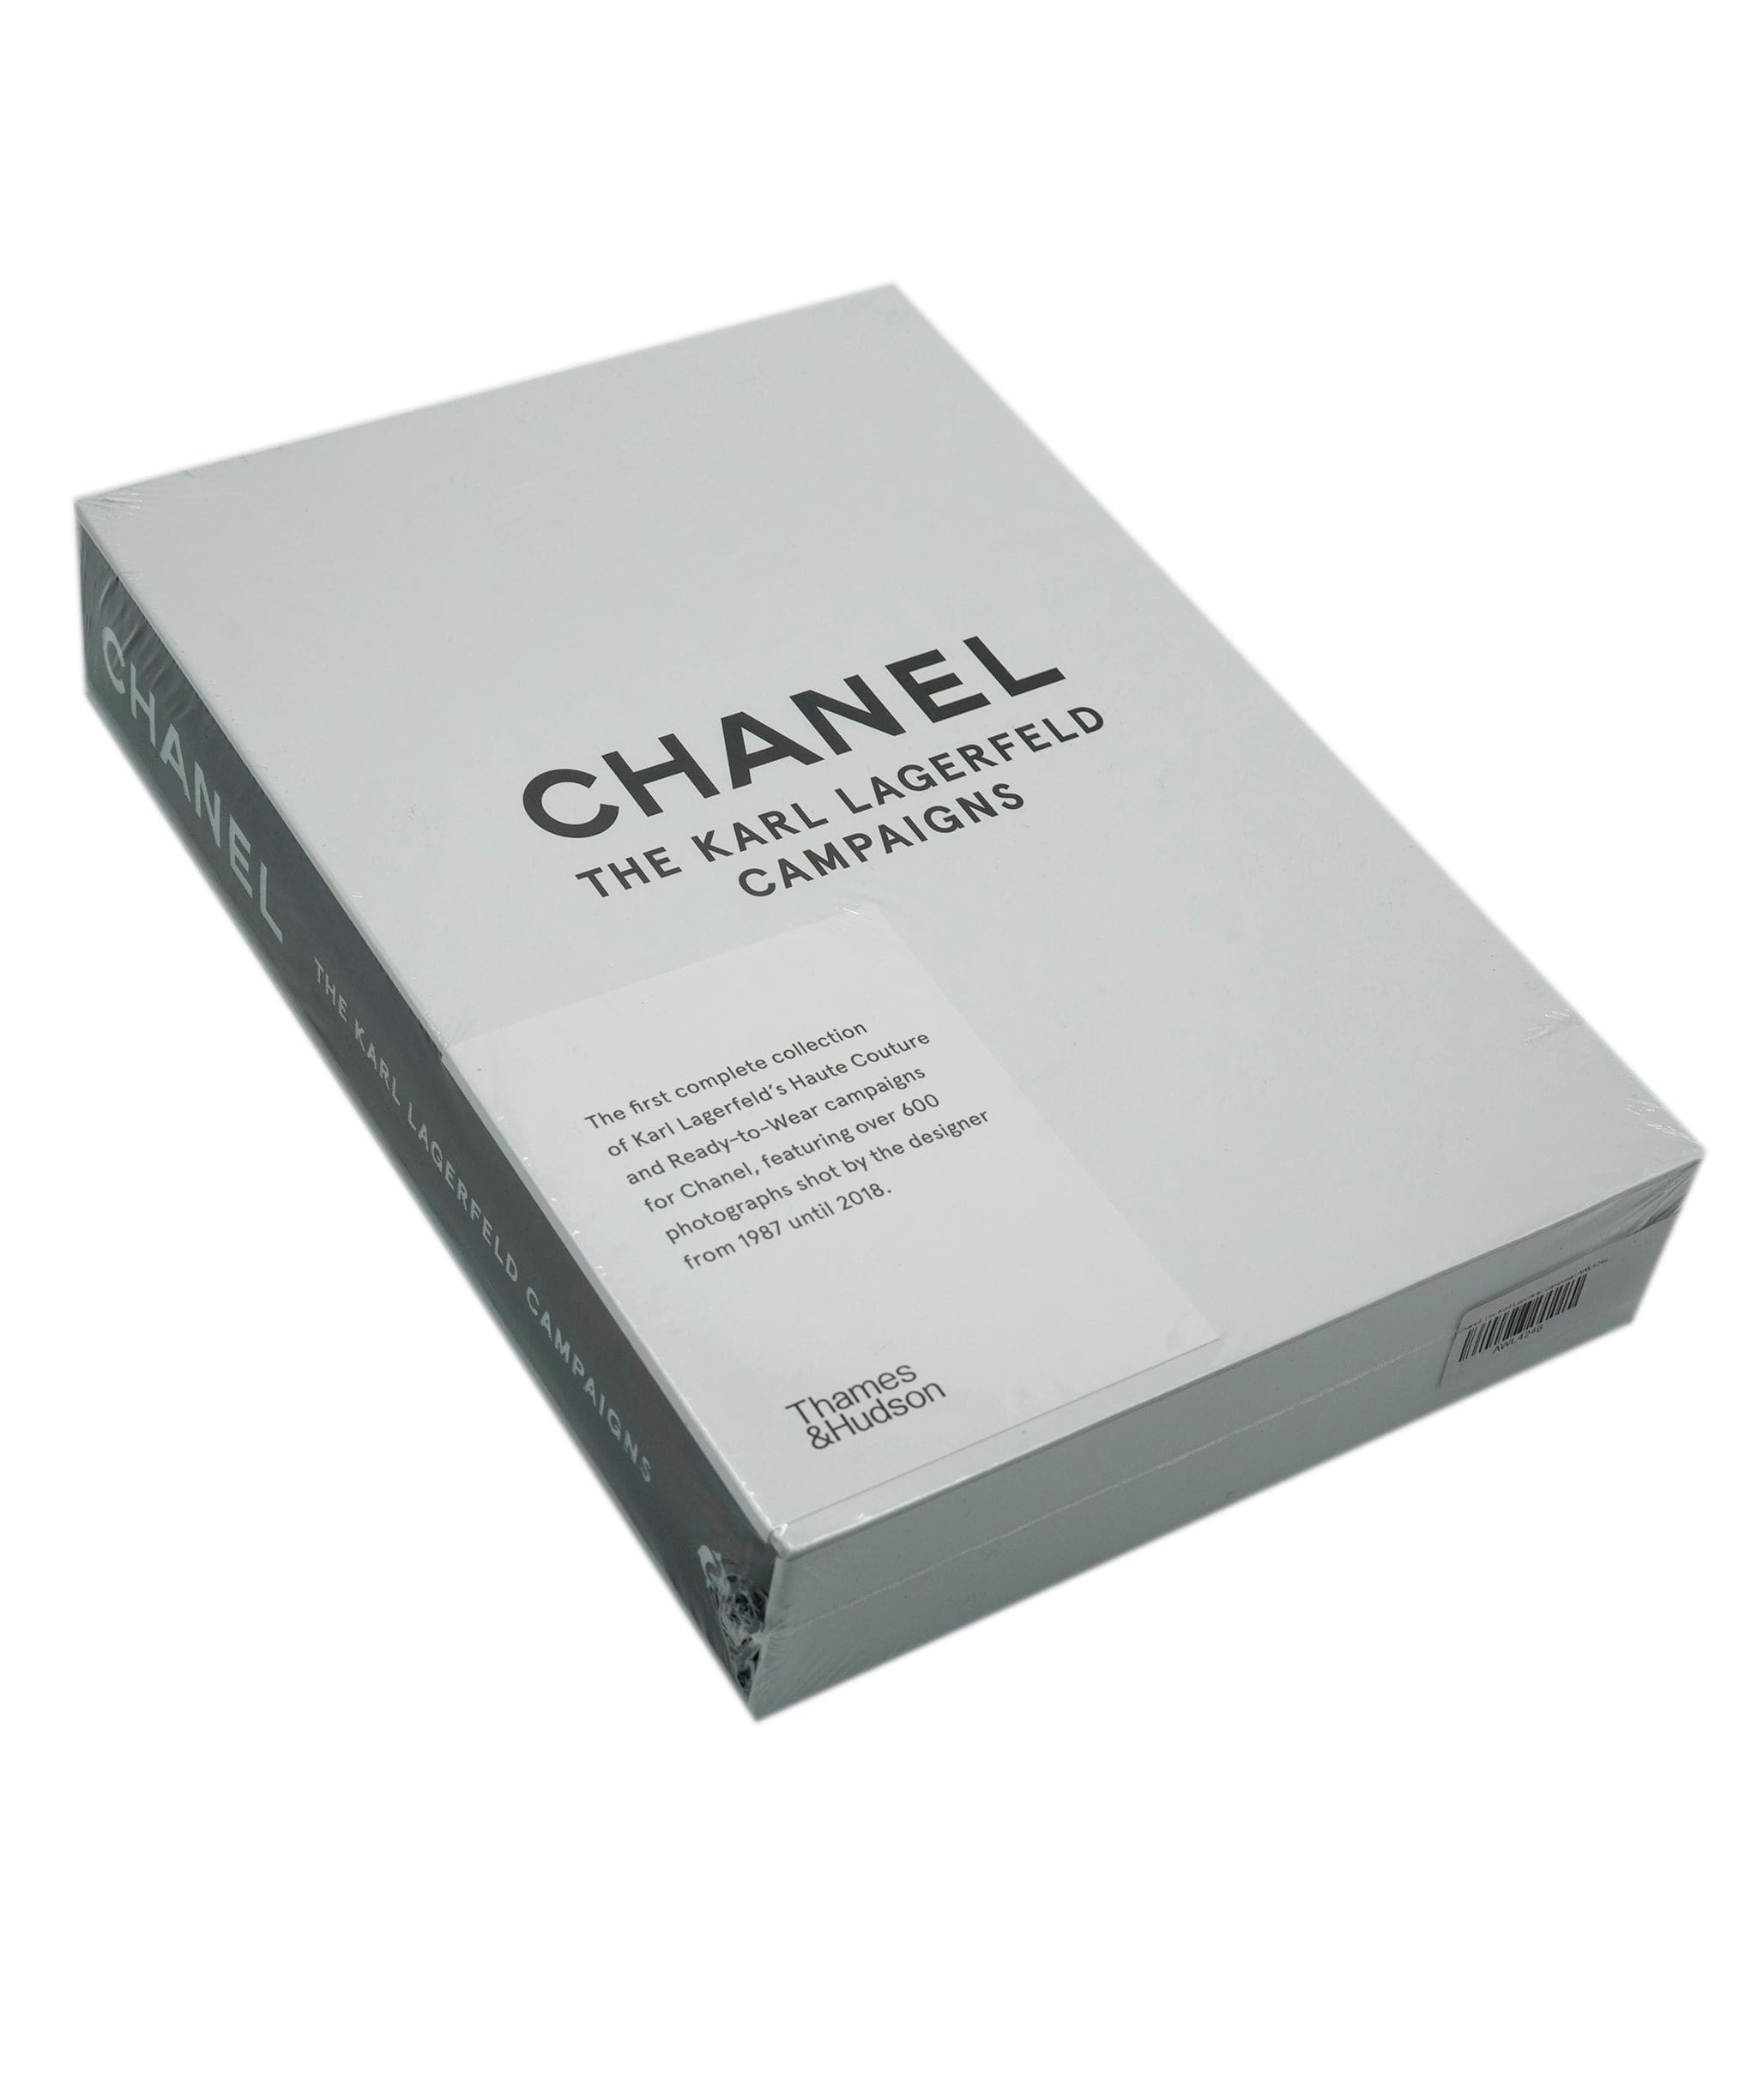 Thames and Hudson Chanel: The Karl Lagerfeld Campaign AWL4246